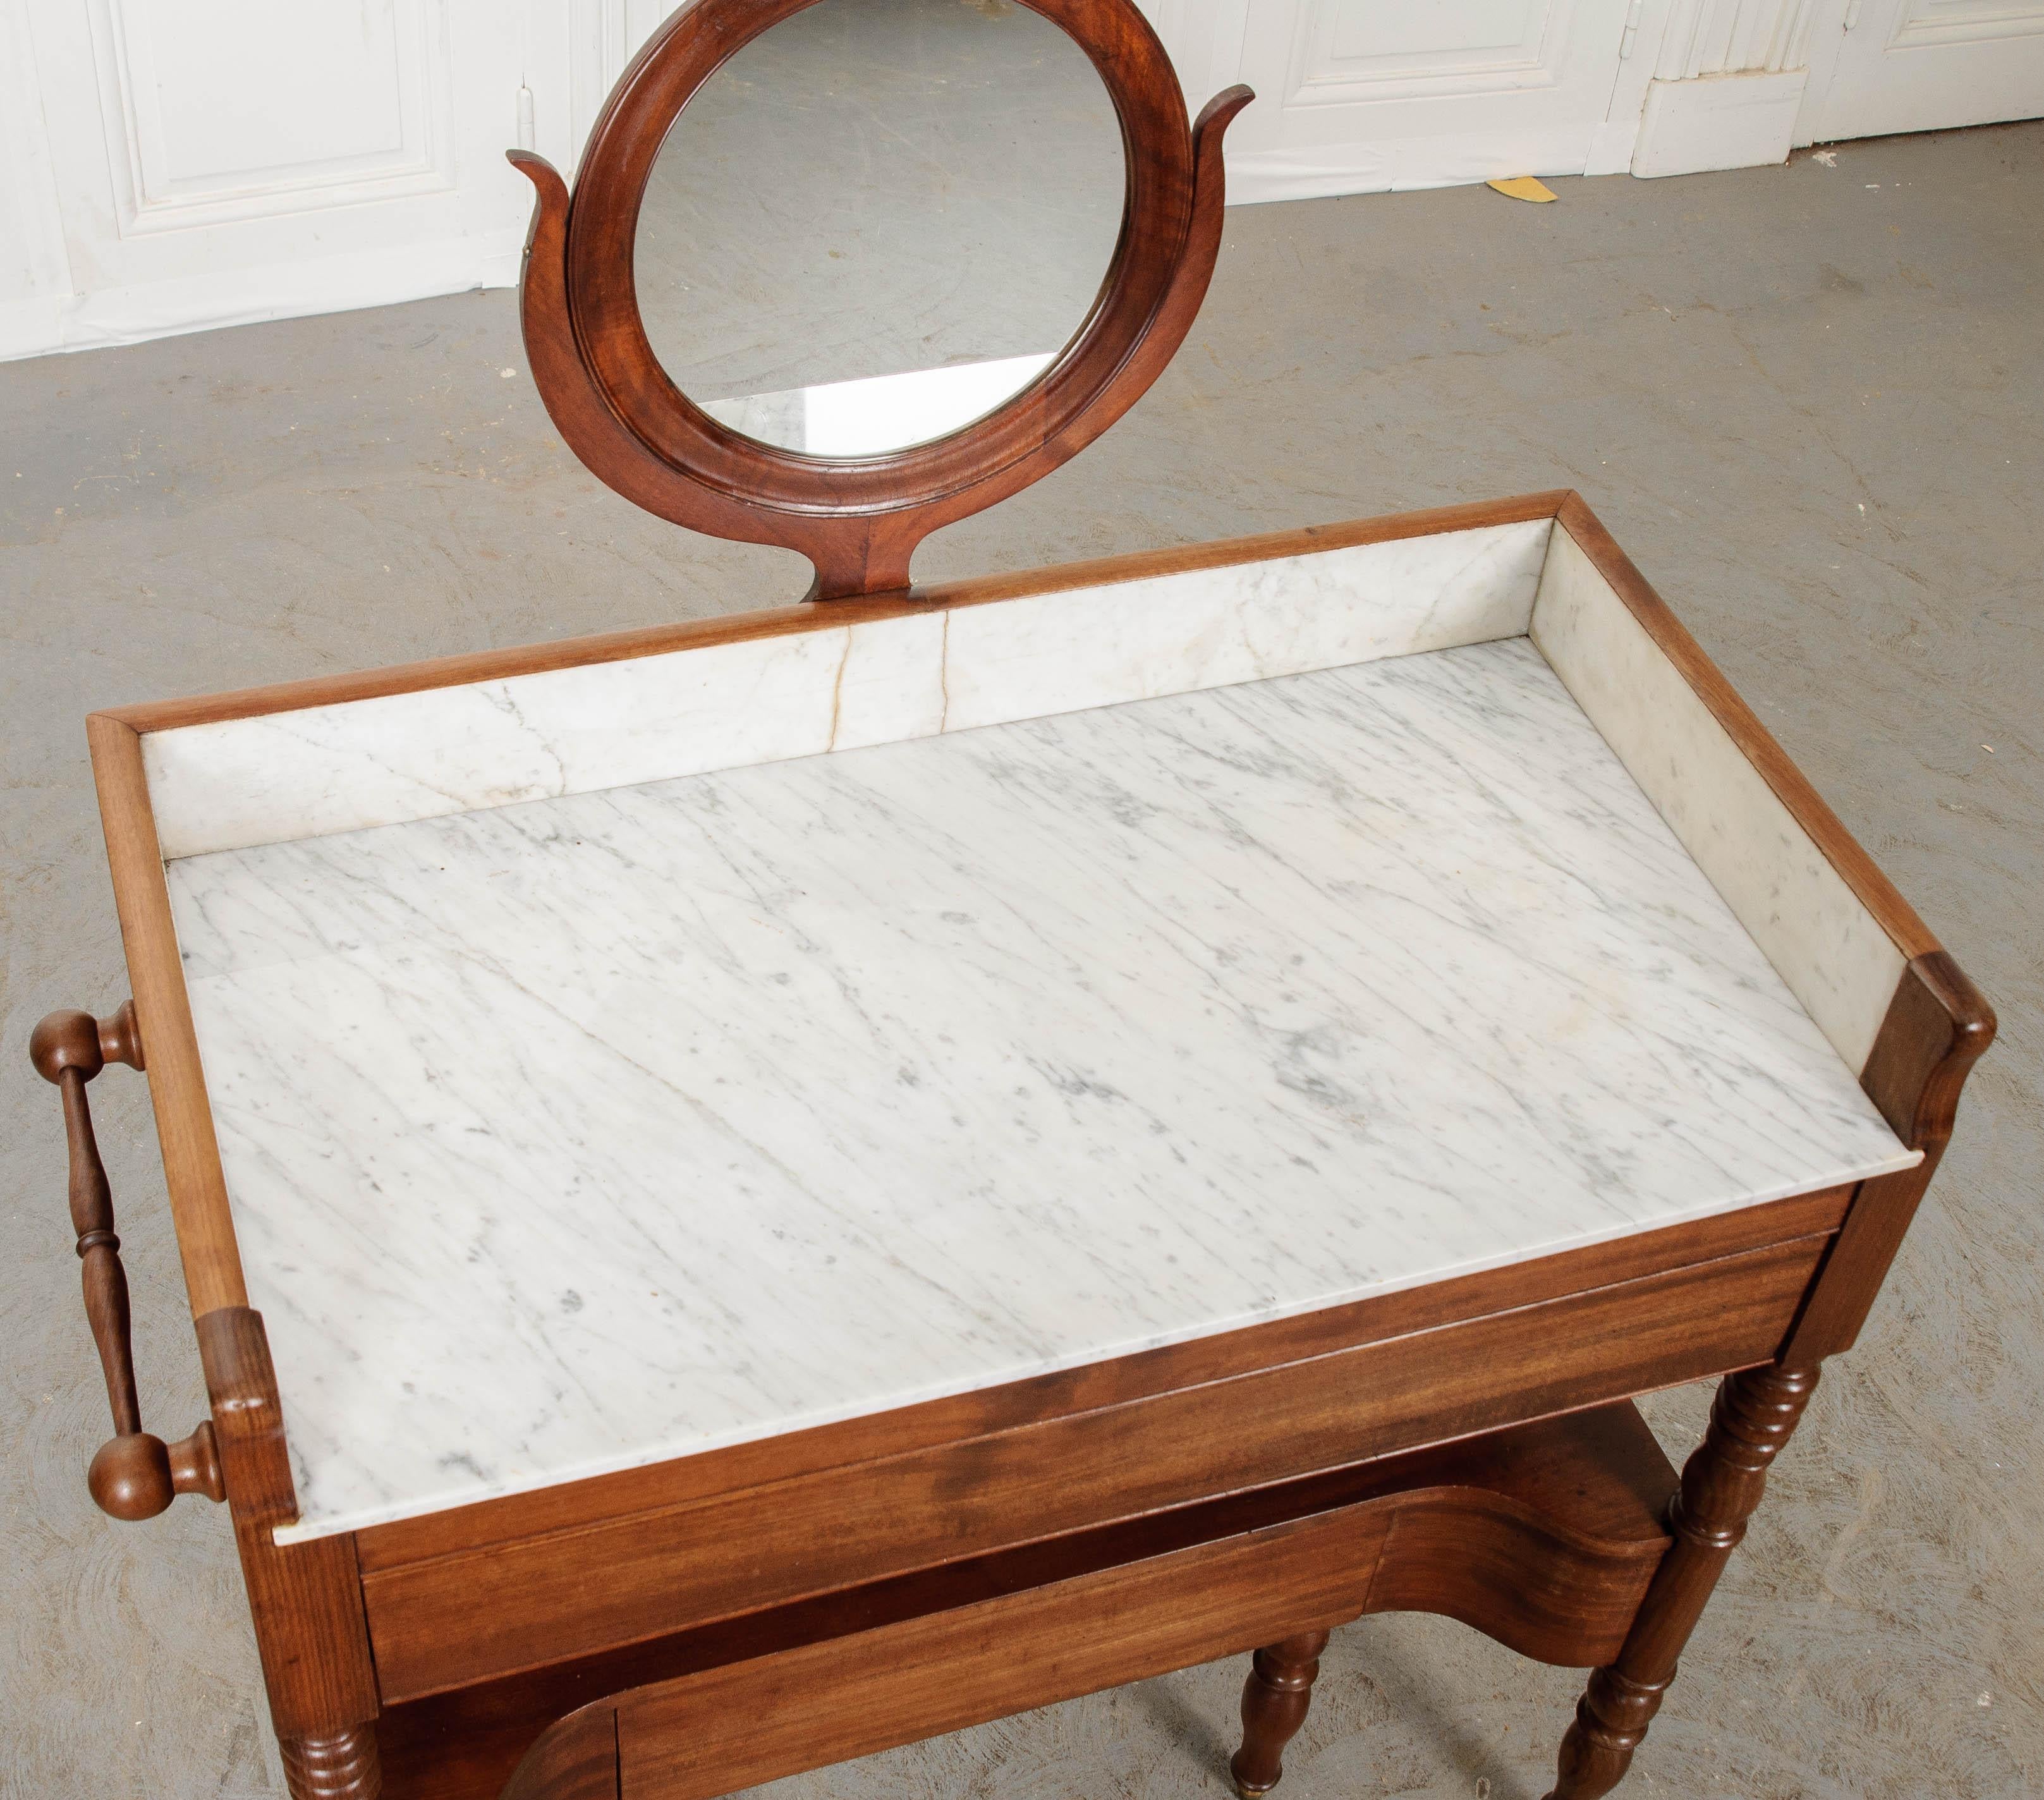 A rewarding beauty regiment begins with vanity. This French 19th century mahogany vanity, in fact! Equipped with a tilting circular mirror, this antique dressing table keeps all things cosmetic in one place. The marble top forgives spilled nail